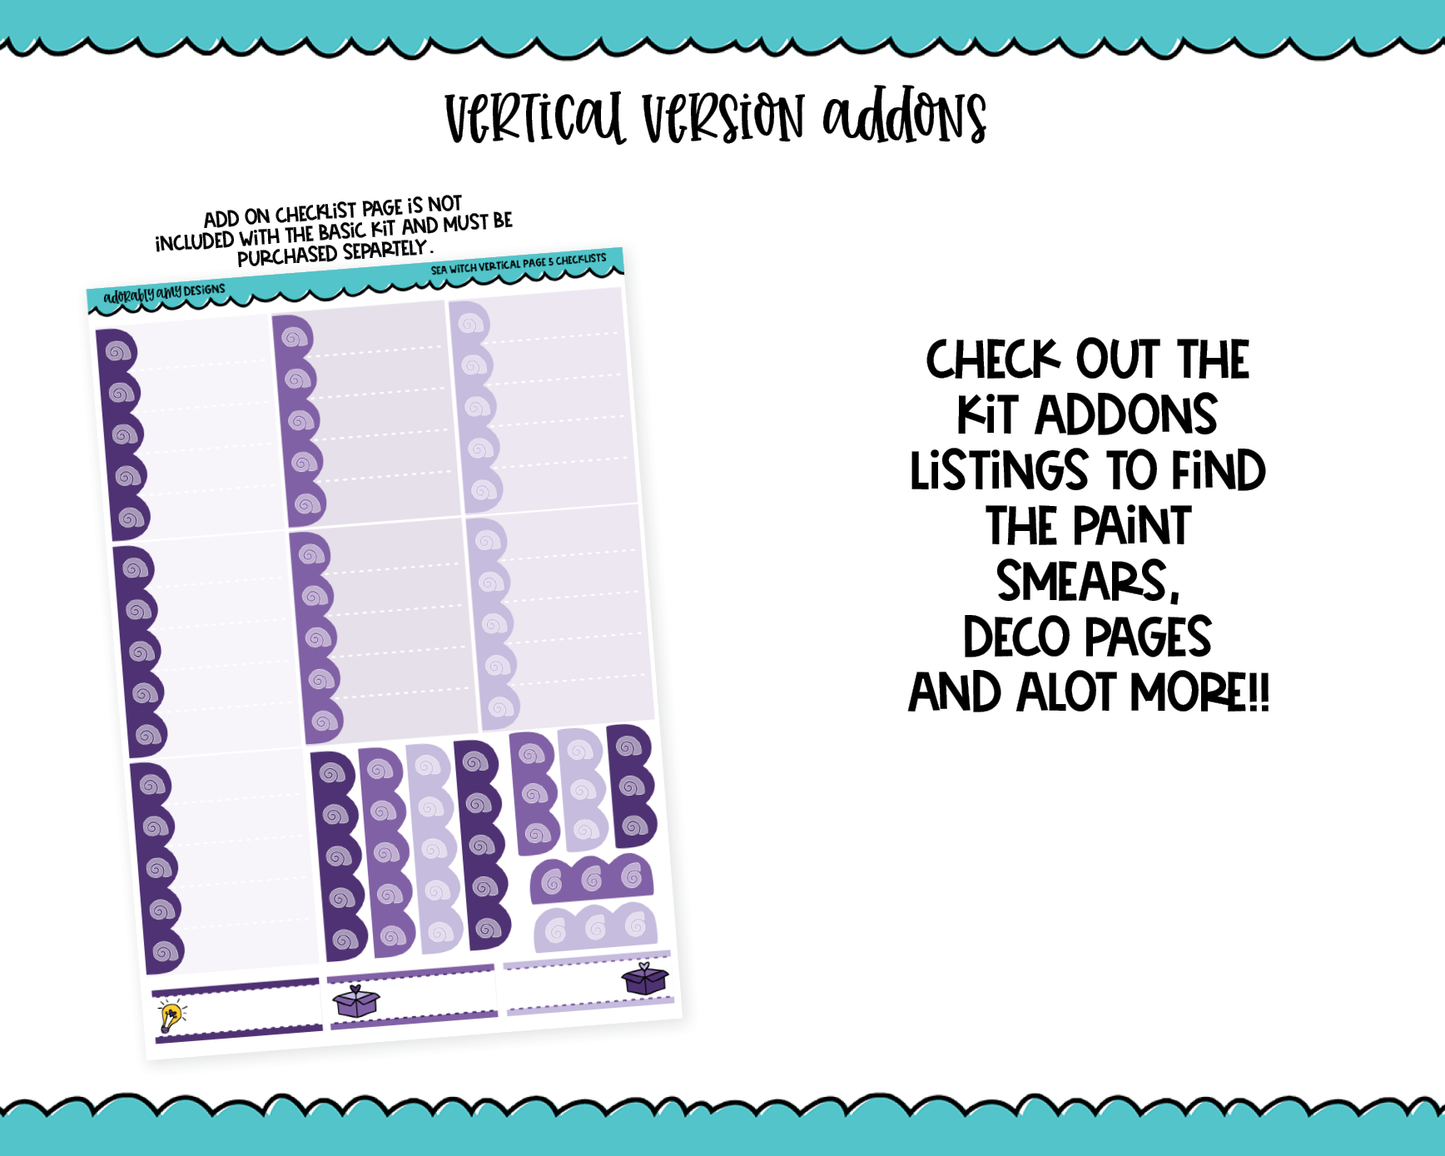 Vertical Sea Witch Ursula Little Mermaid Themed Planner Sticker Kit for Vertical Standard Size Planners or Inserts